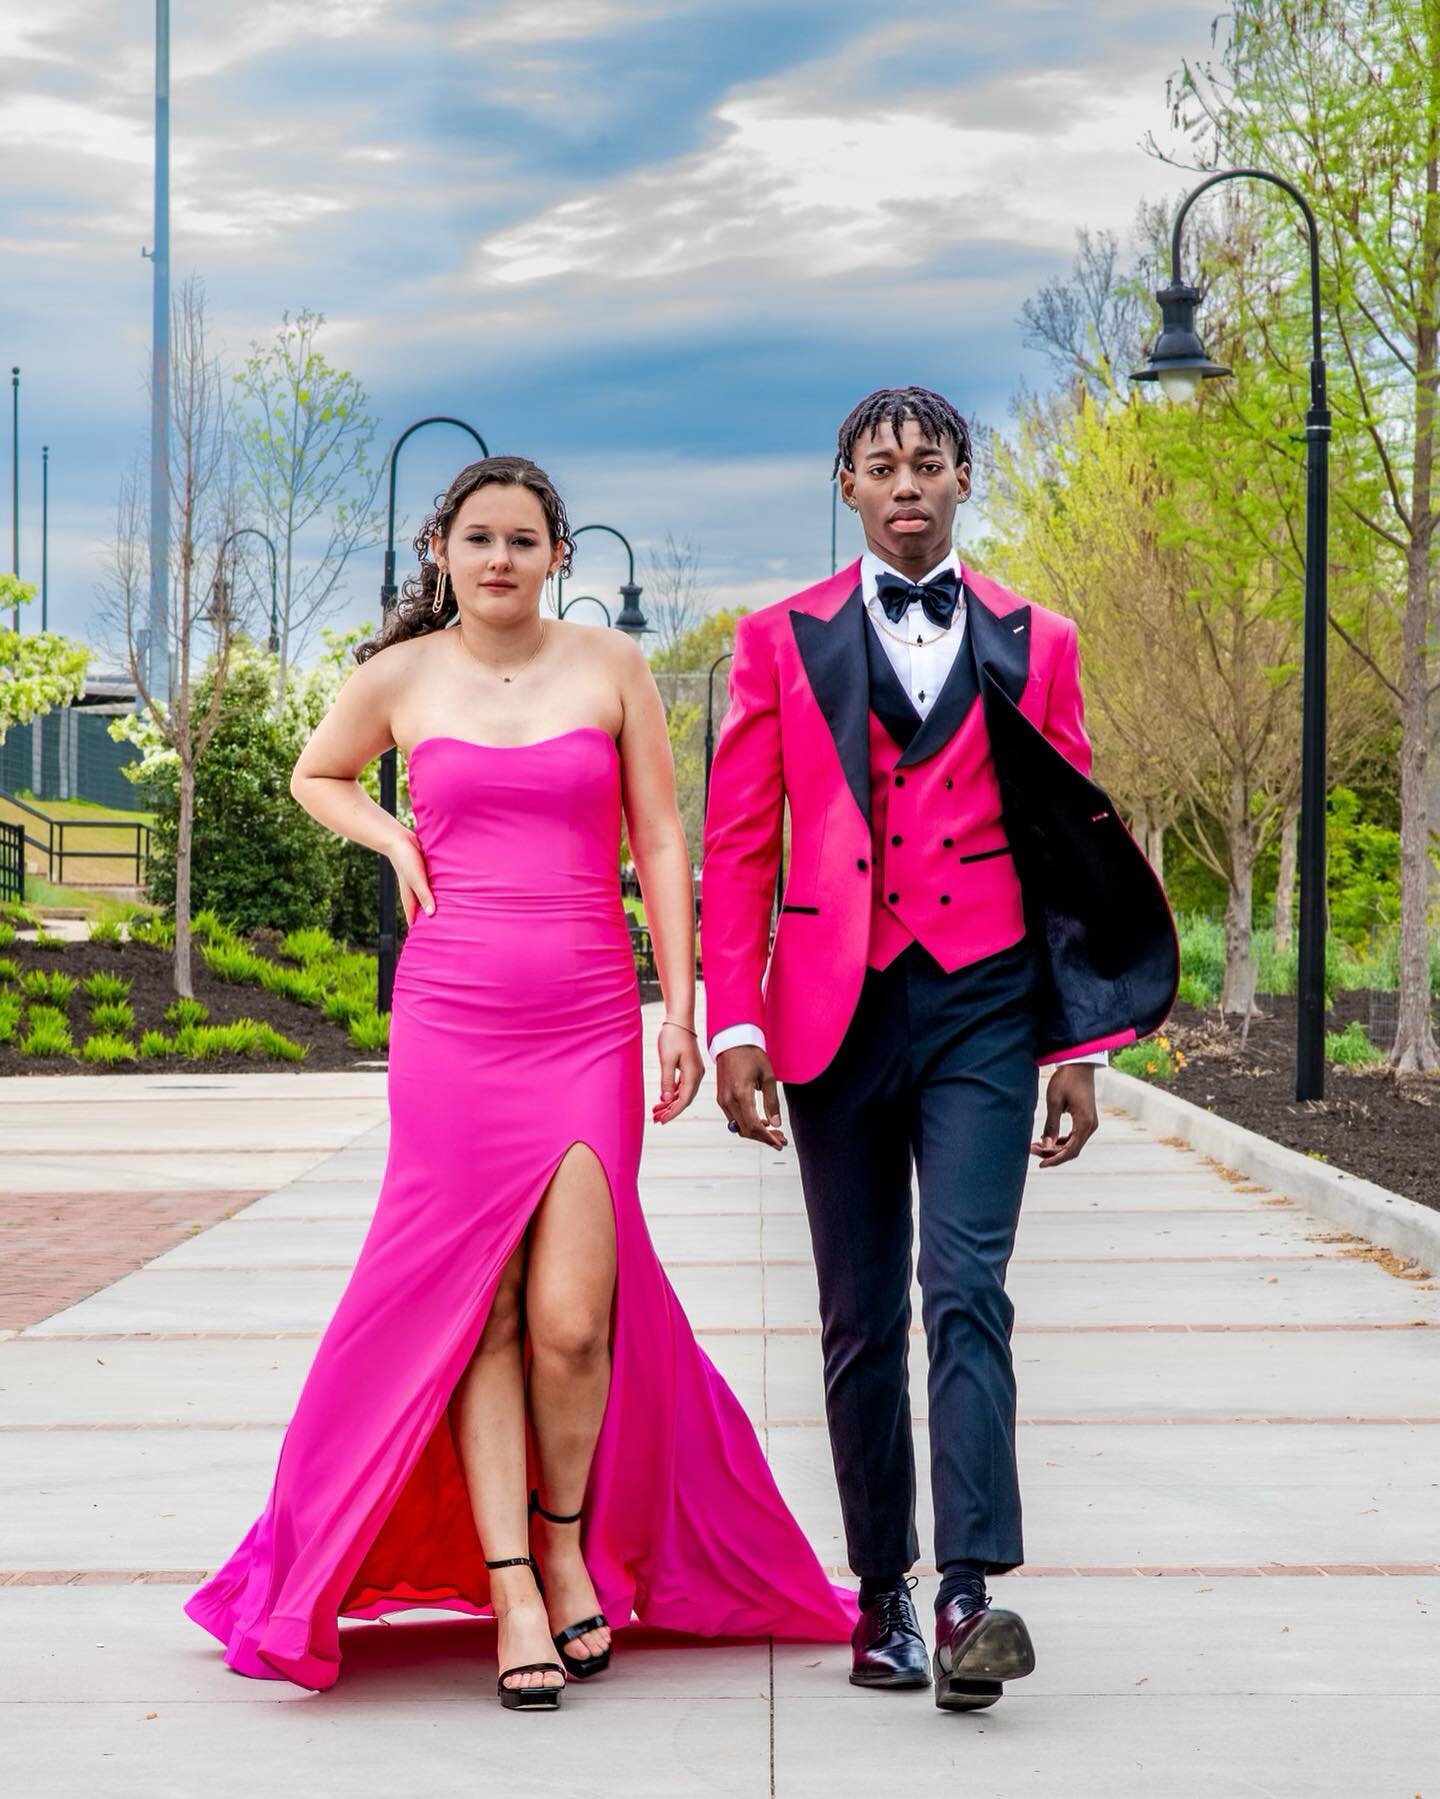 #Prom2023 S/O and congratulations to Philip Butler! For his #prom look, Philip chose a #custom #formal #ensemble in #fuchsia and black, #MadeToMeasure by @keithjonesmtm ✨ Stunning!